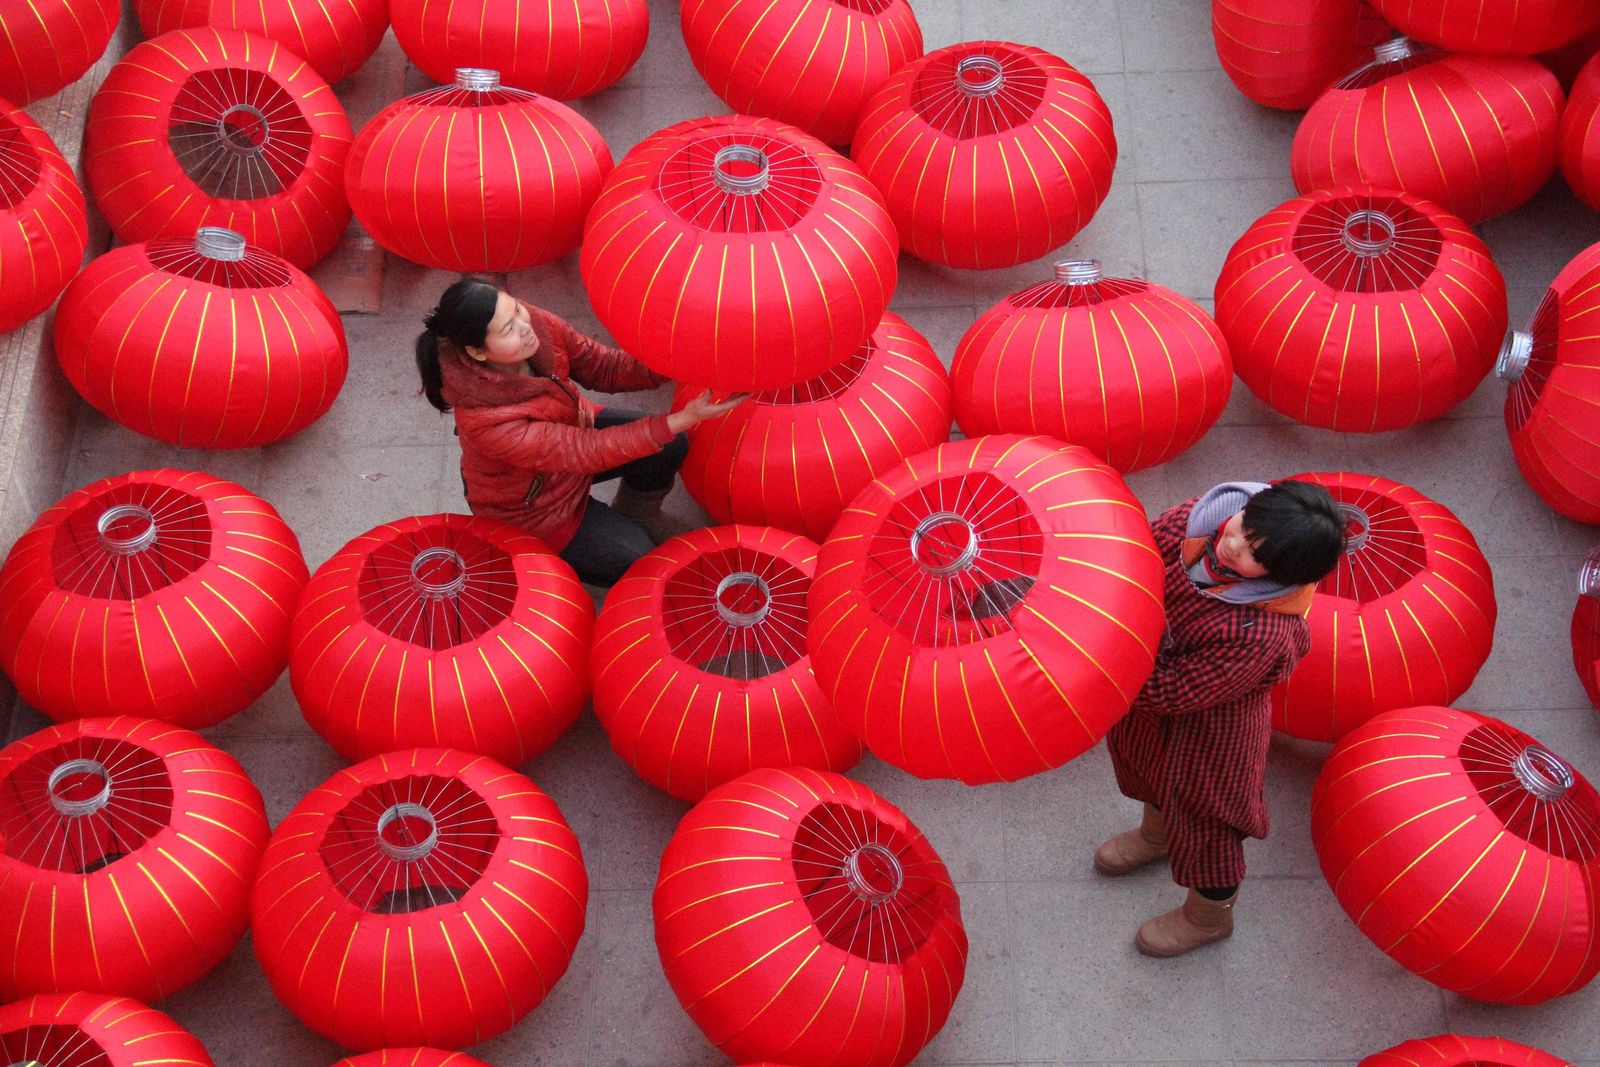 Light Up Your Chinese With These Lantern Festival Phrases